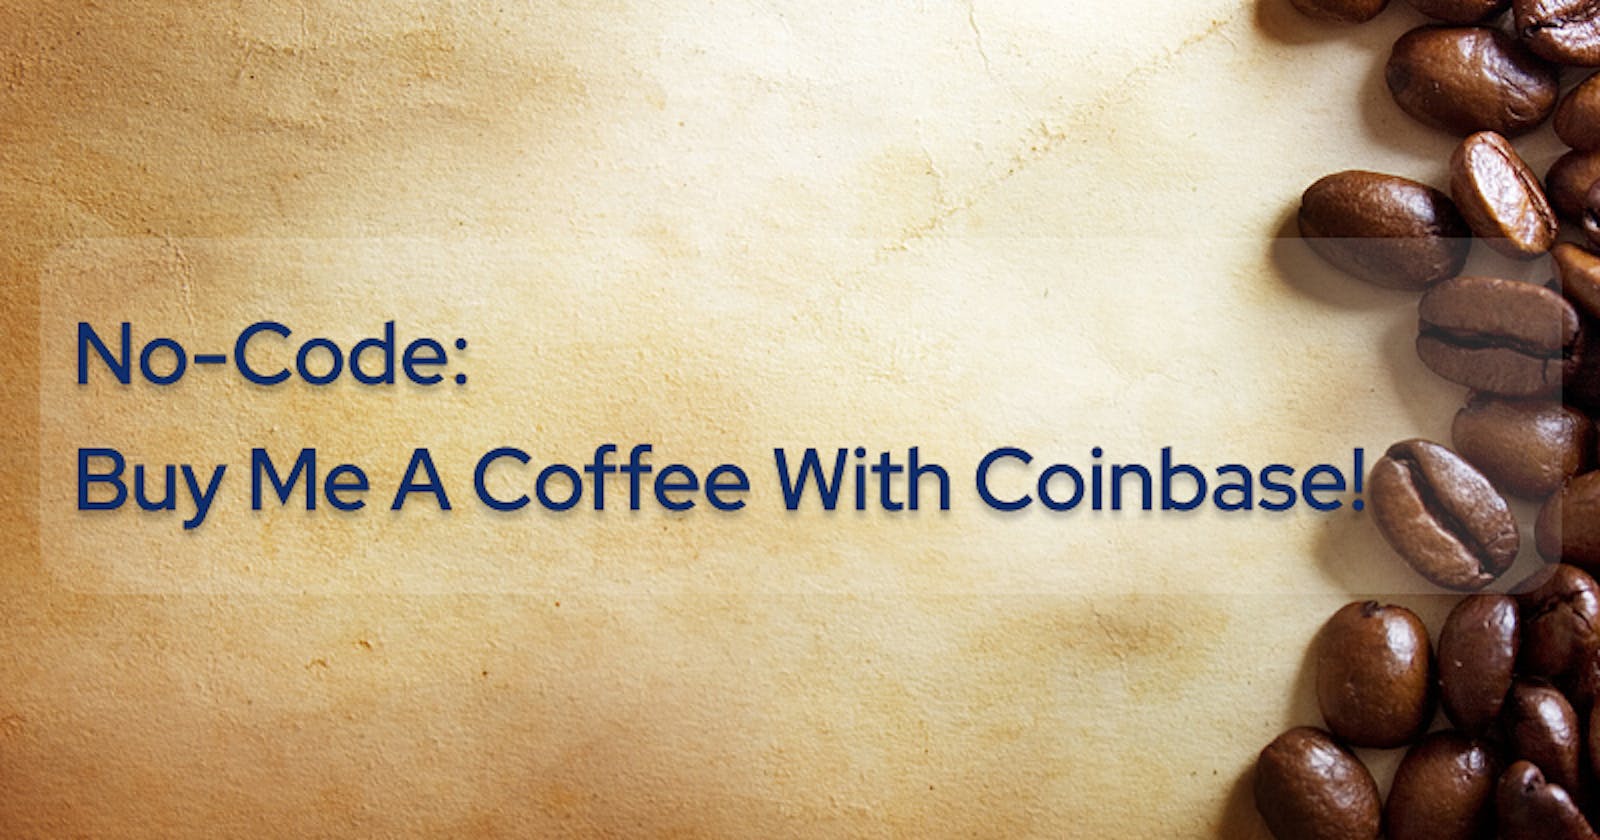 No-Code: Buy Me a Coffee With Coinbase!